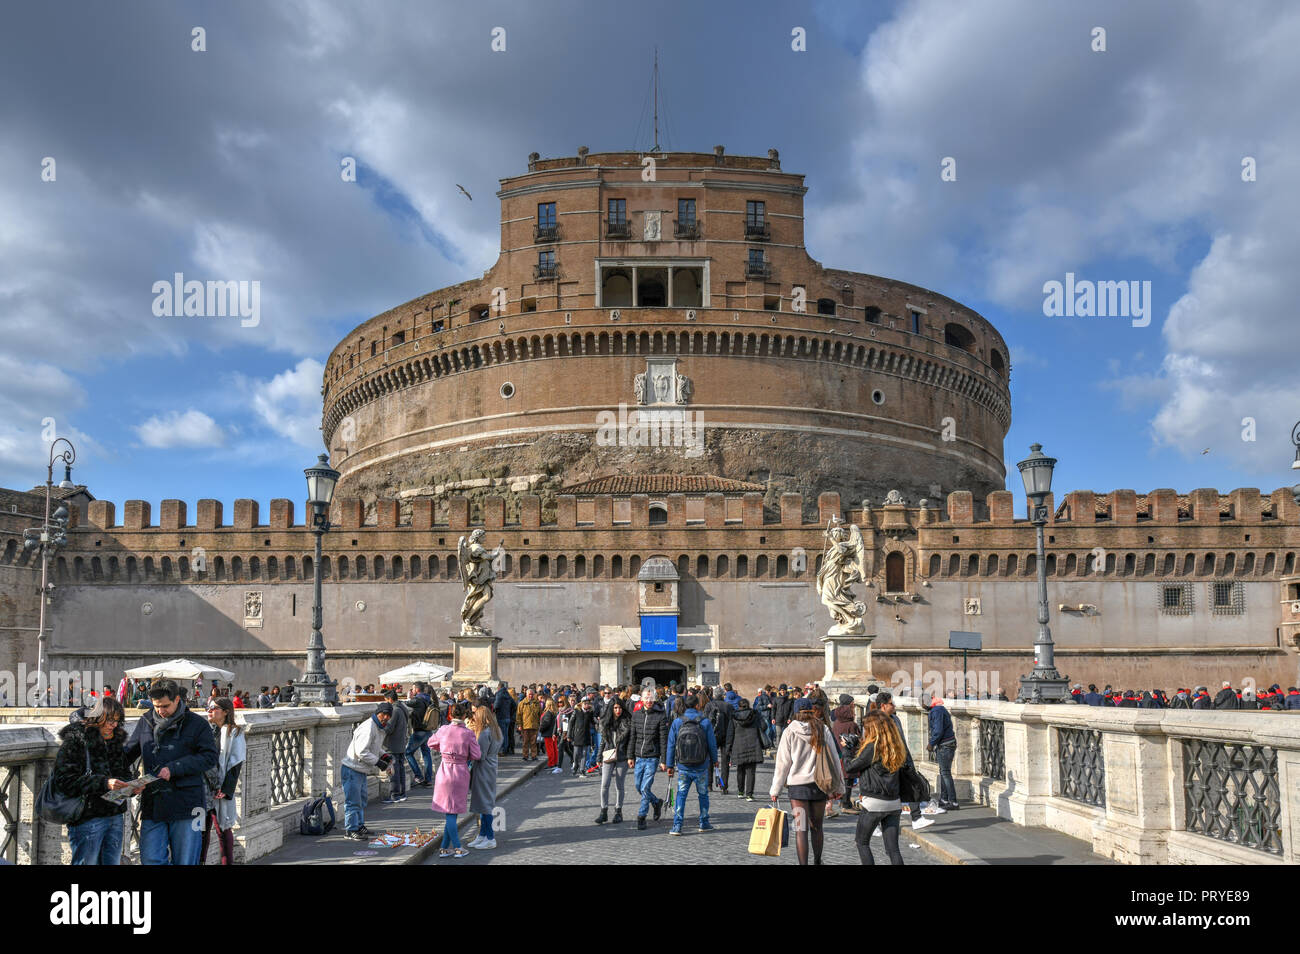 Rome, Italy - March 24, 2018: Castel Sant'Angelo or Castle of Holy Angel, Rome, Italy. Castel Sant'Angelo is one of the main travel destinations in Eu Stock Photo